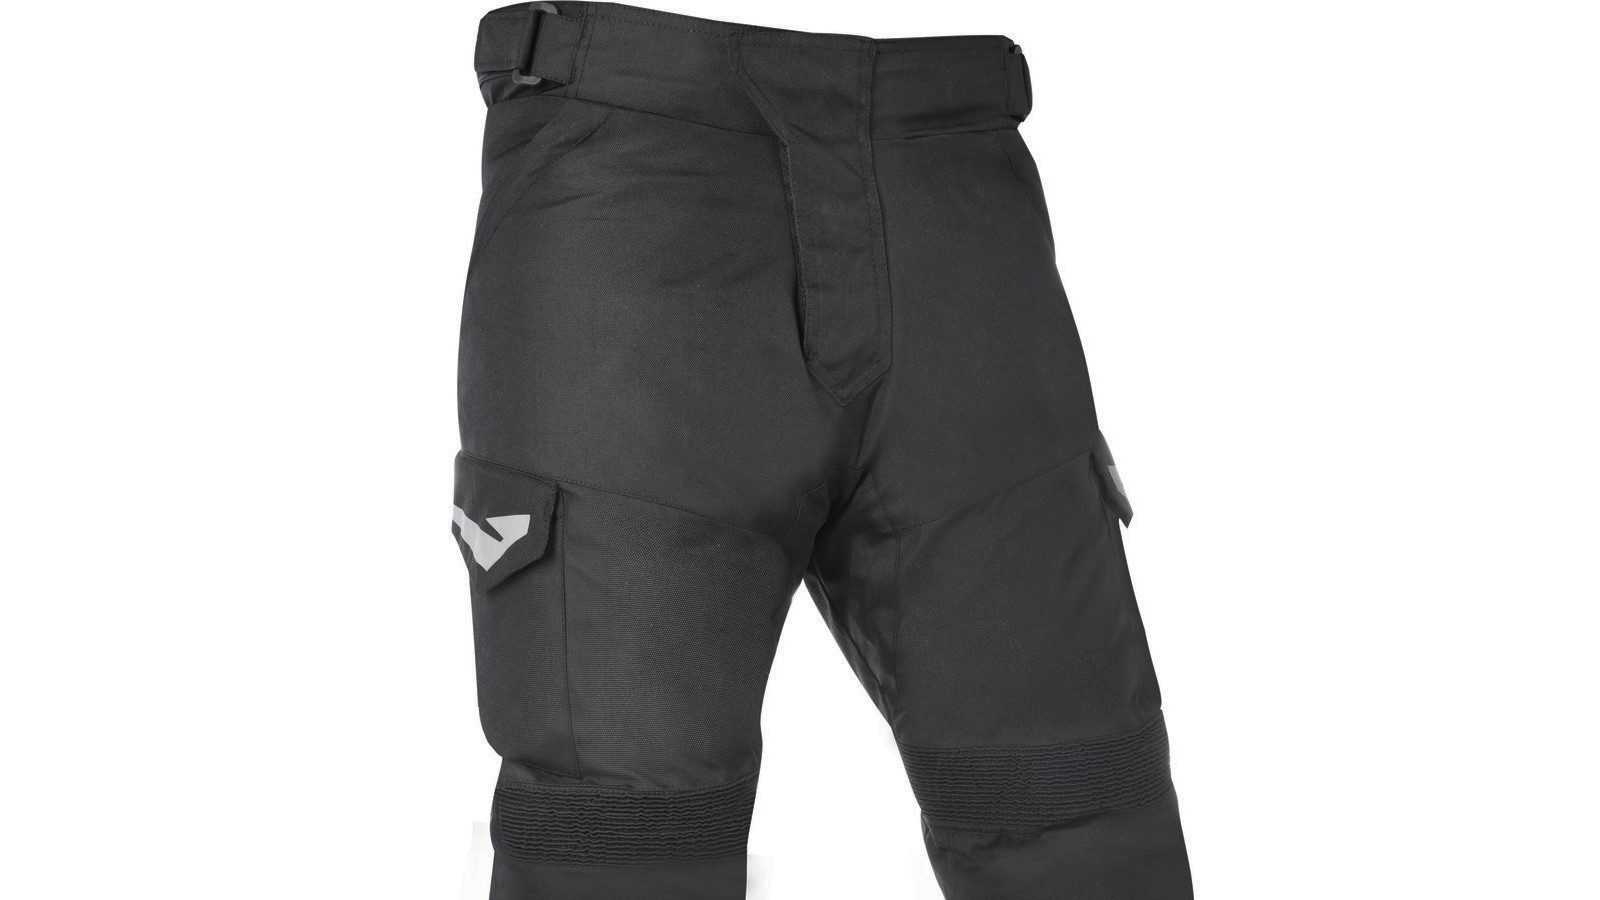 Dainese waterproof motorcycle trousers  review  London Evening Standard   Evening Standard